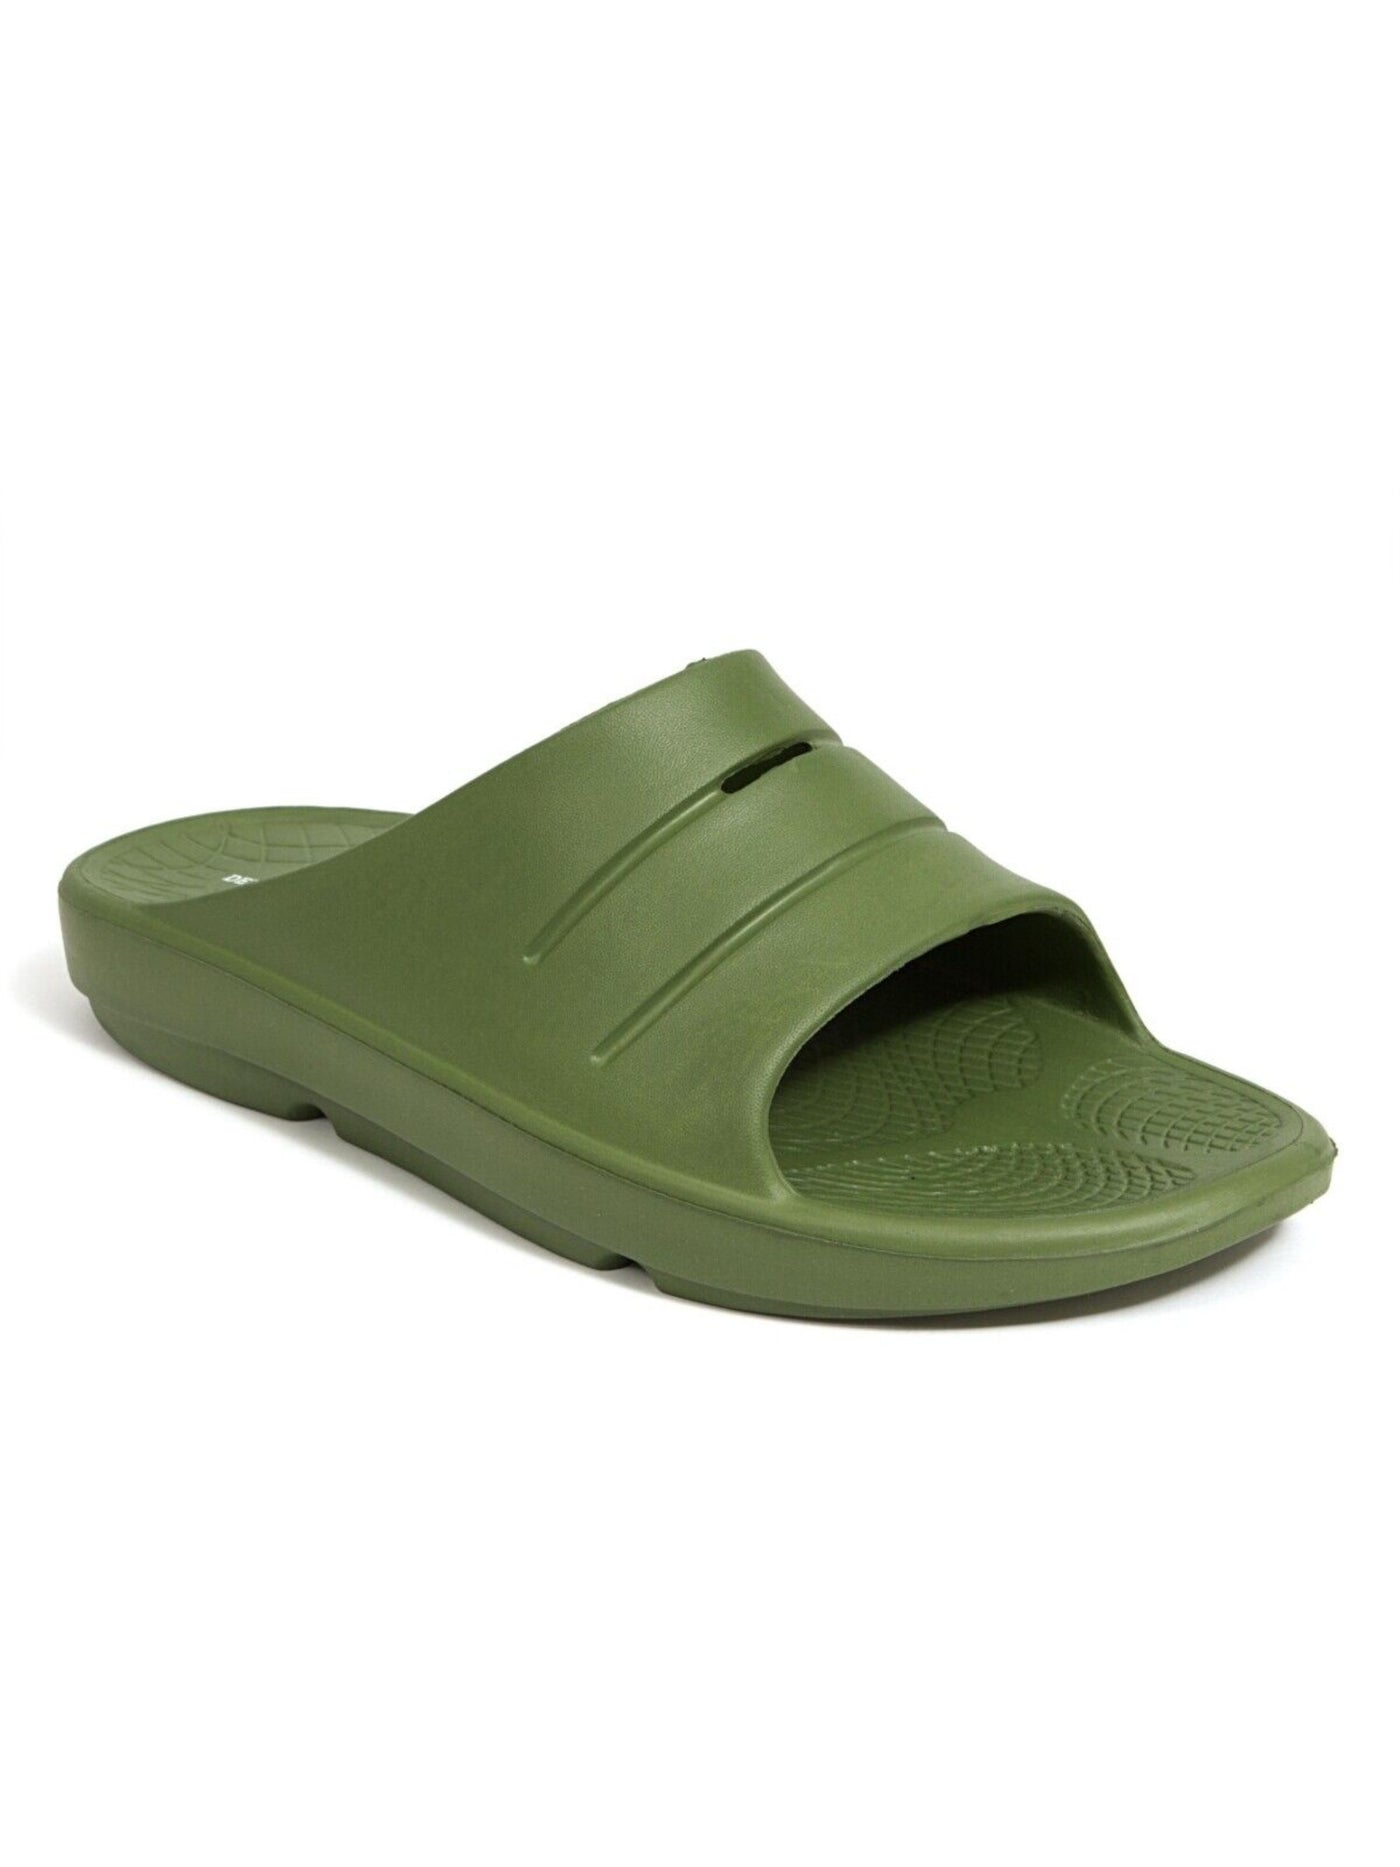 DEER STAGS Mens Green Molded Footbed Cushioned Ward Round Toe Slip On Slide Sandals Shoes 11 M